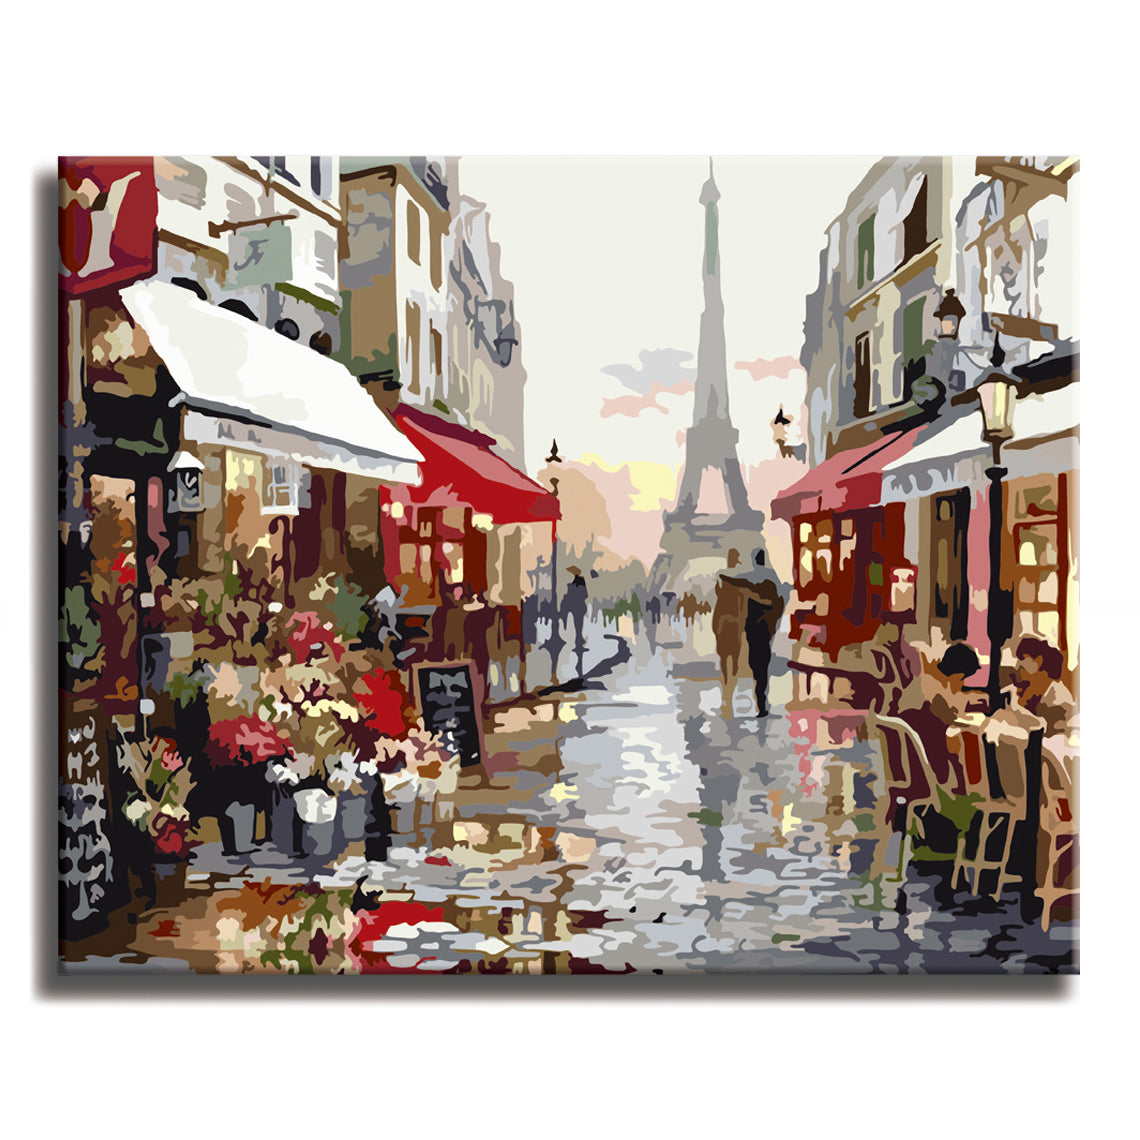 Paris Flower Street - Paint by Number Kit for Adults DIY Oil Painting Kit on Wood Stretched Canvas